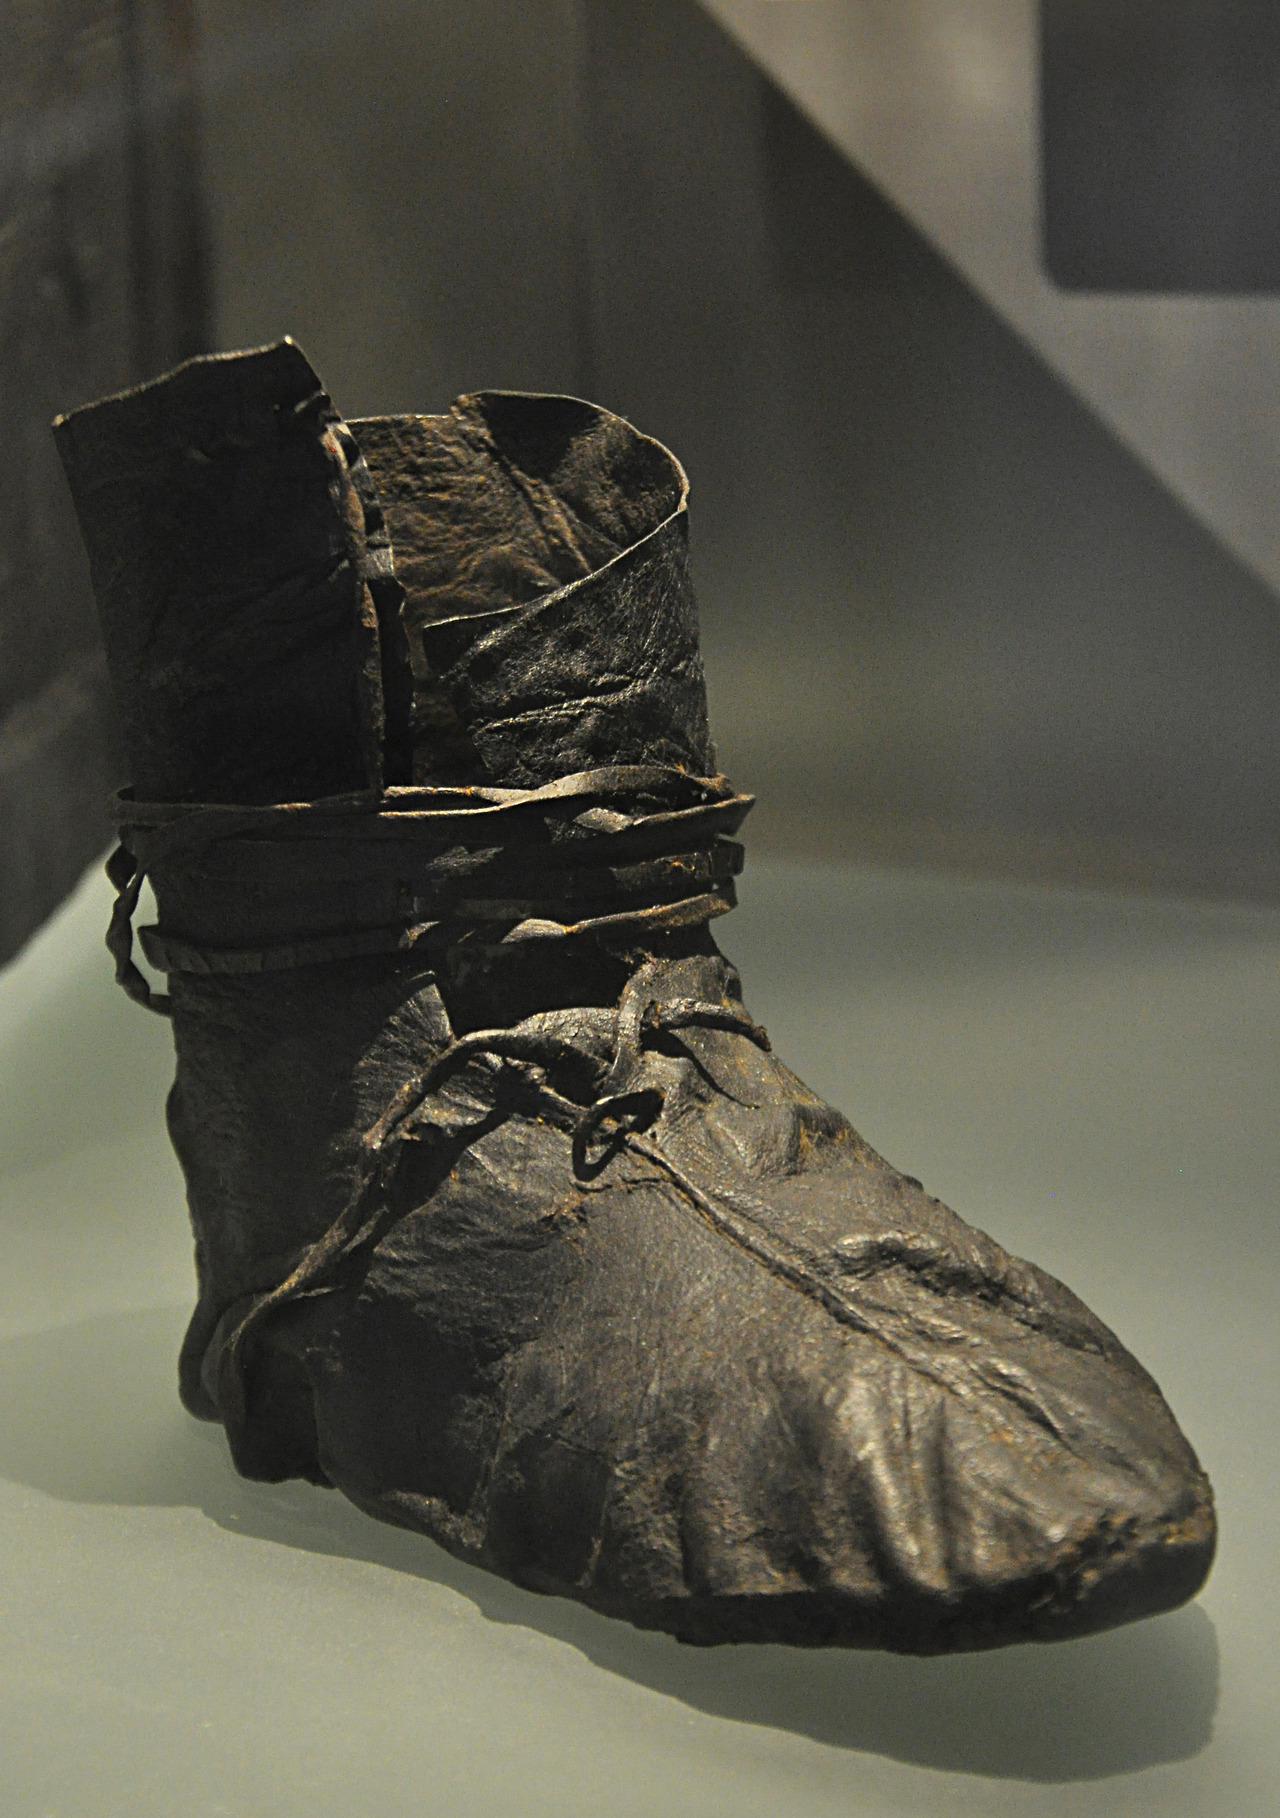 A Viking boot from the Oseberg ship burial in the 9th-10th century, Norway.jpg